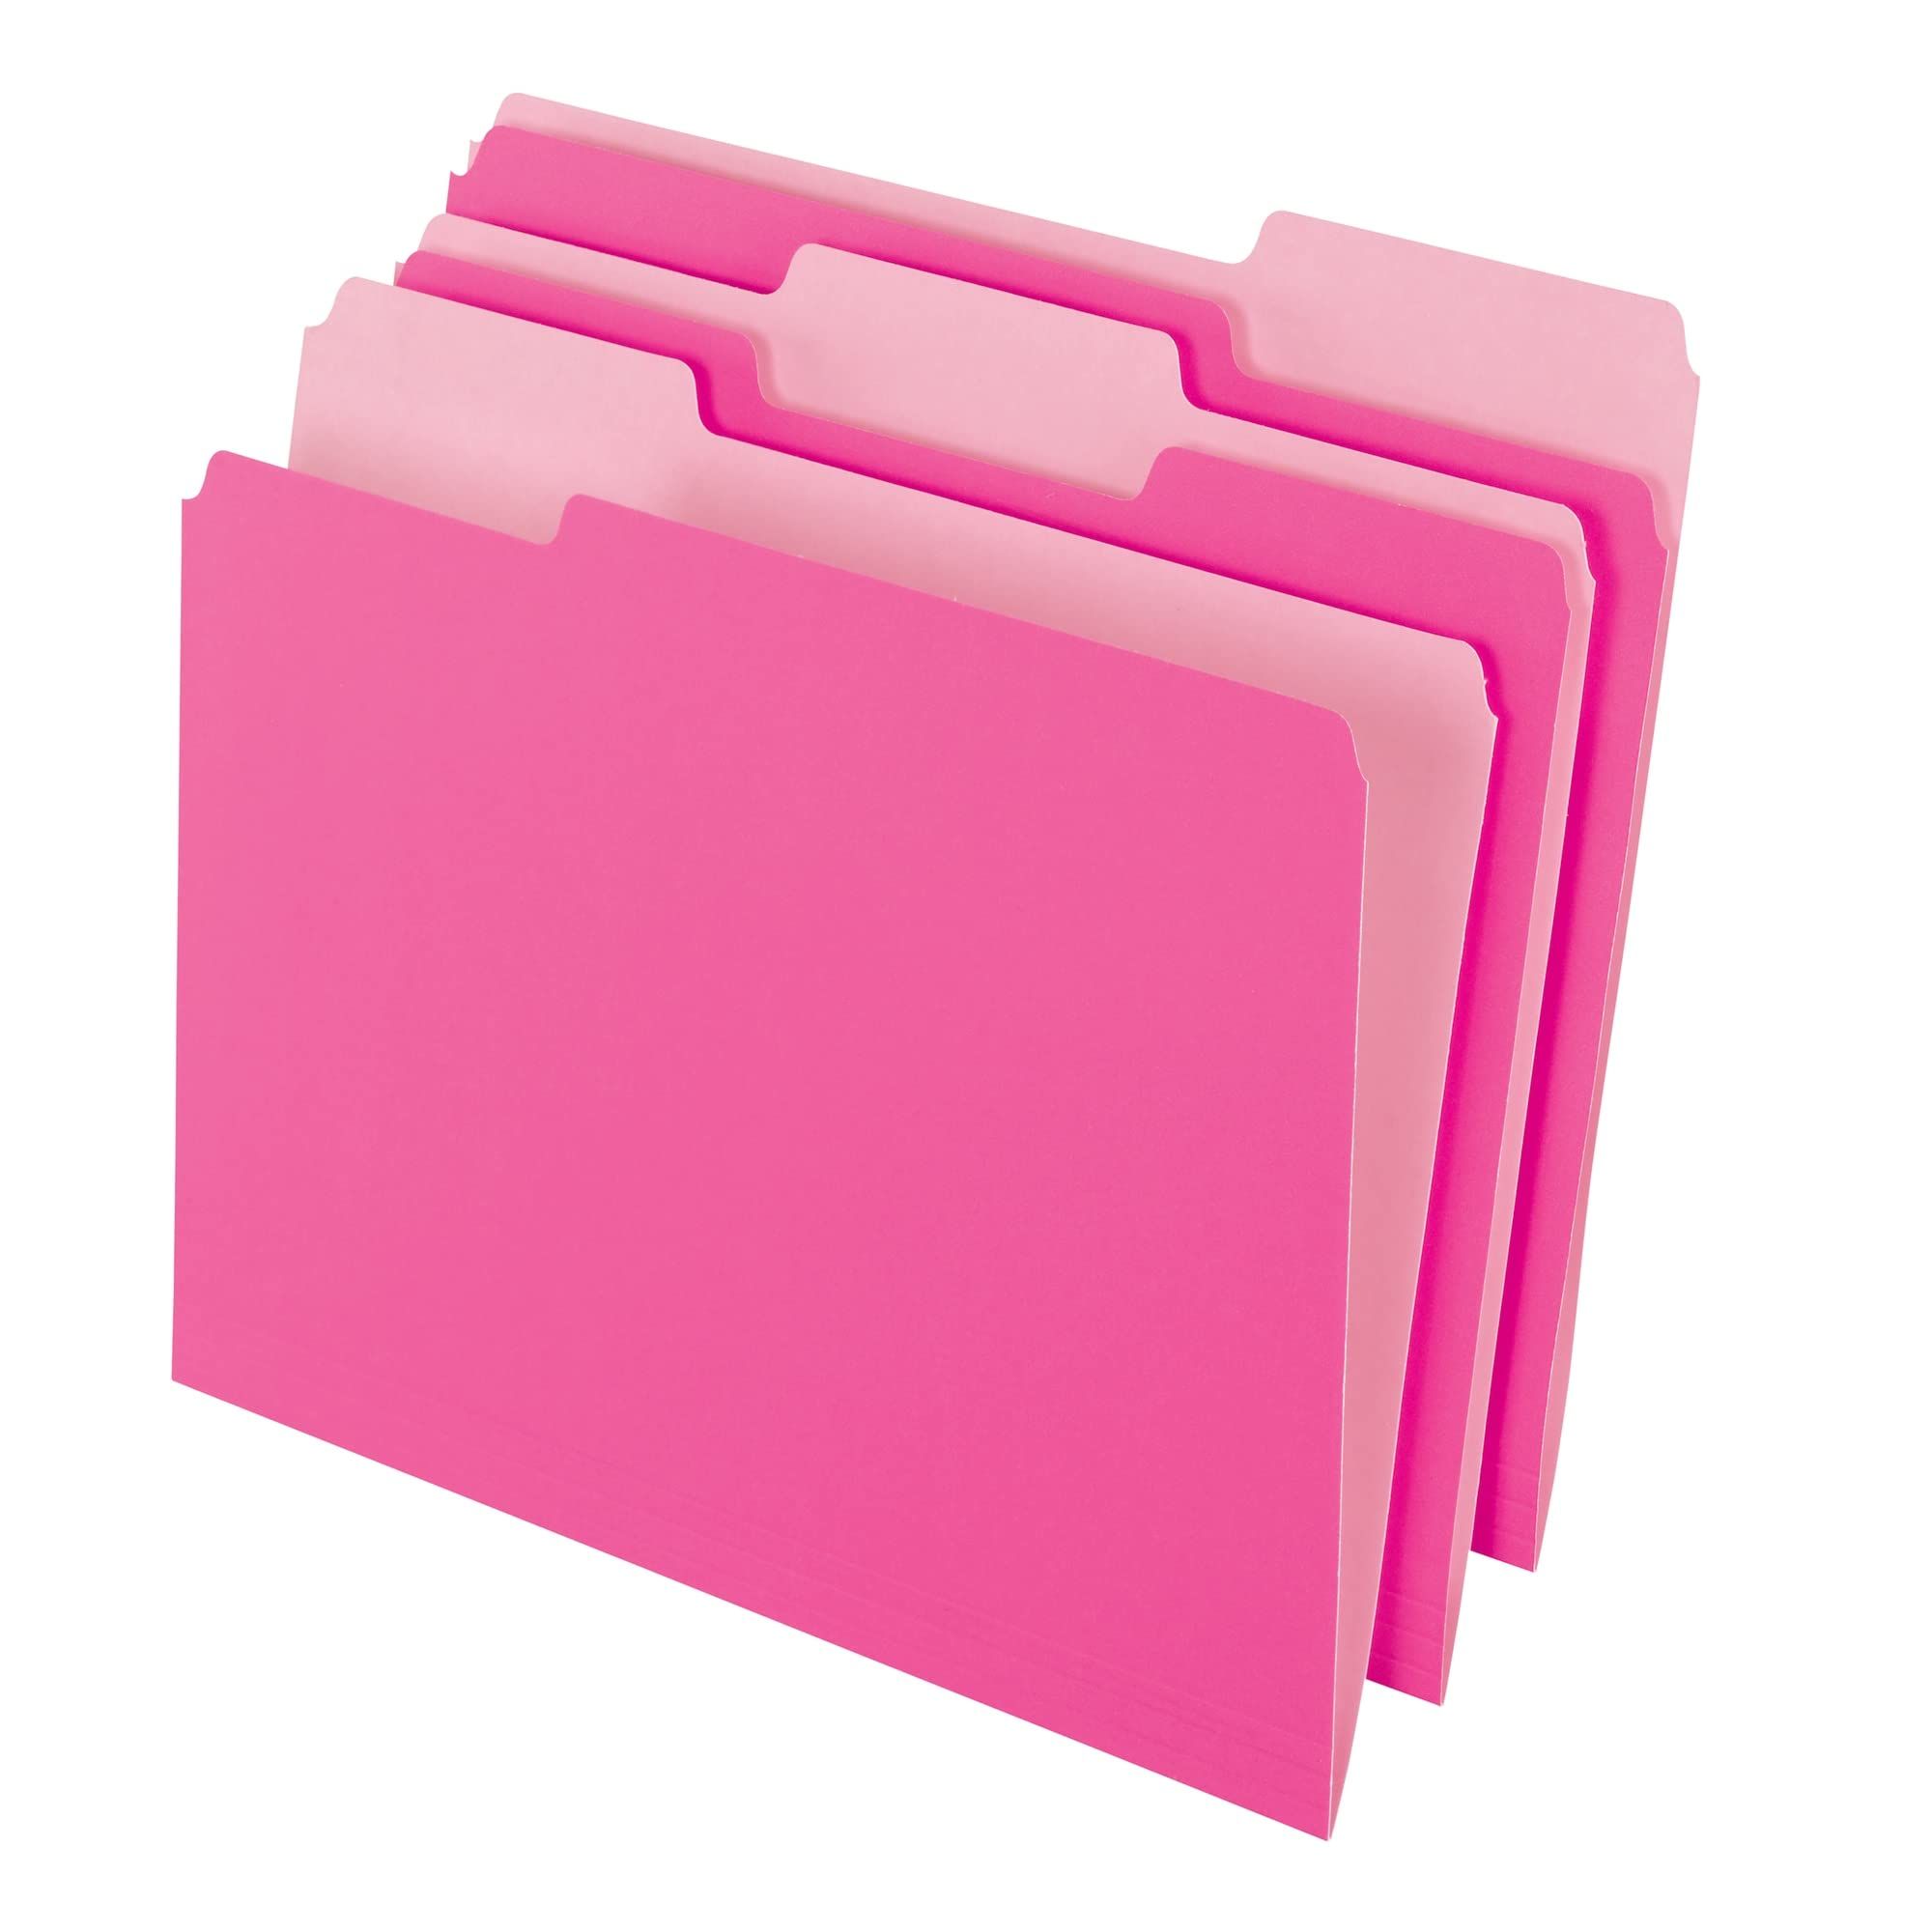 Office Depot Two-Tone Color File Folders, 1/3 Tab Cut, Letter Size, Pink, Box Of 100, OD152 1/3 PIN | Amazon (US)